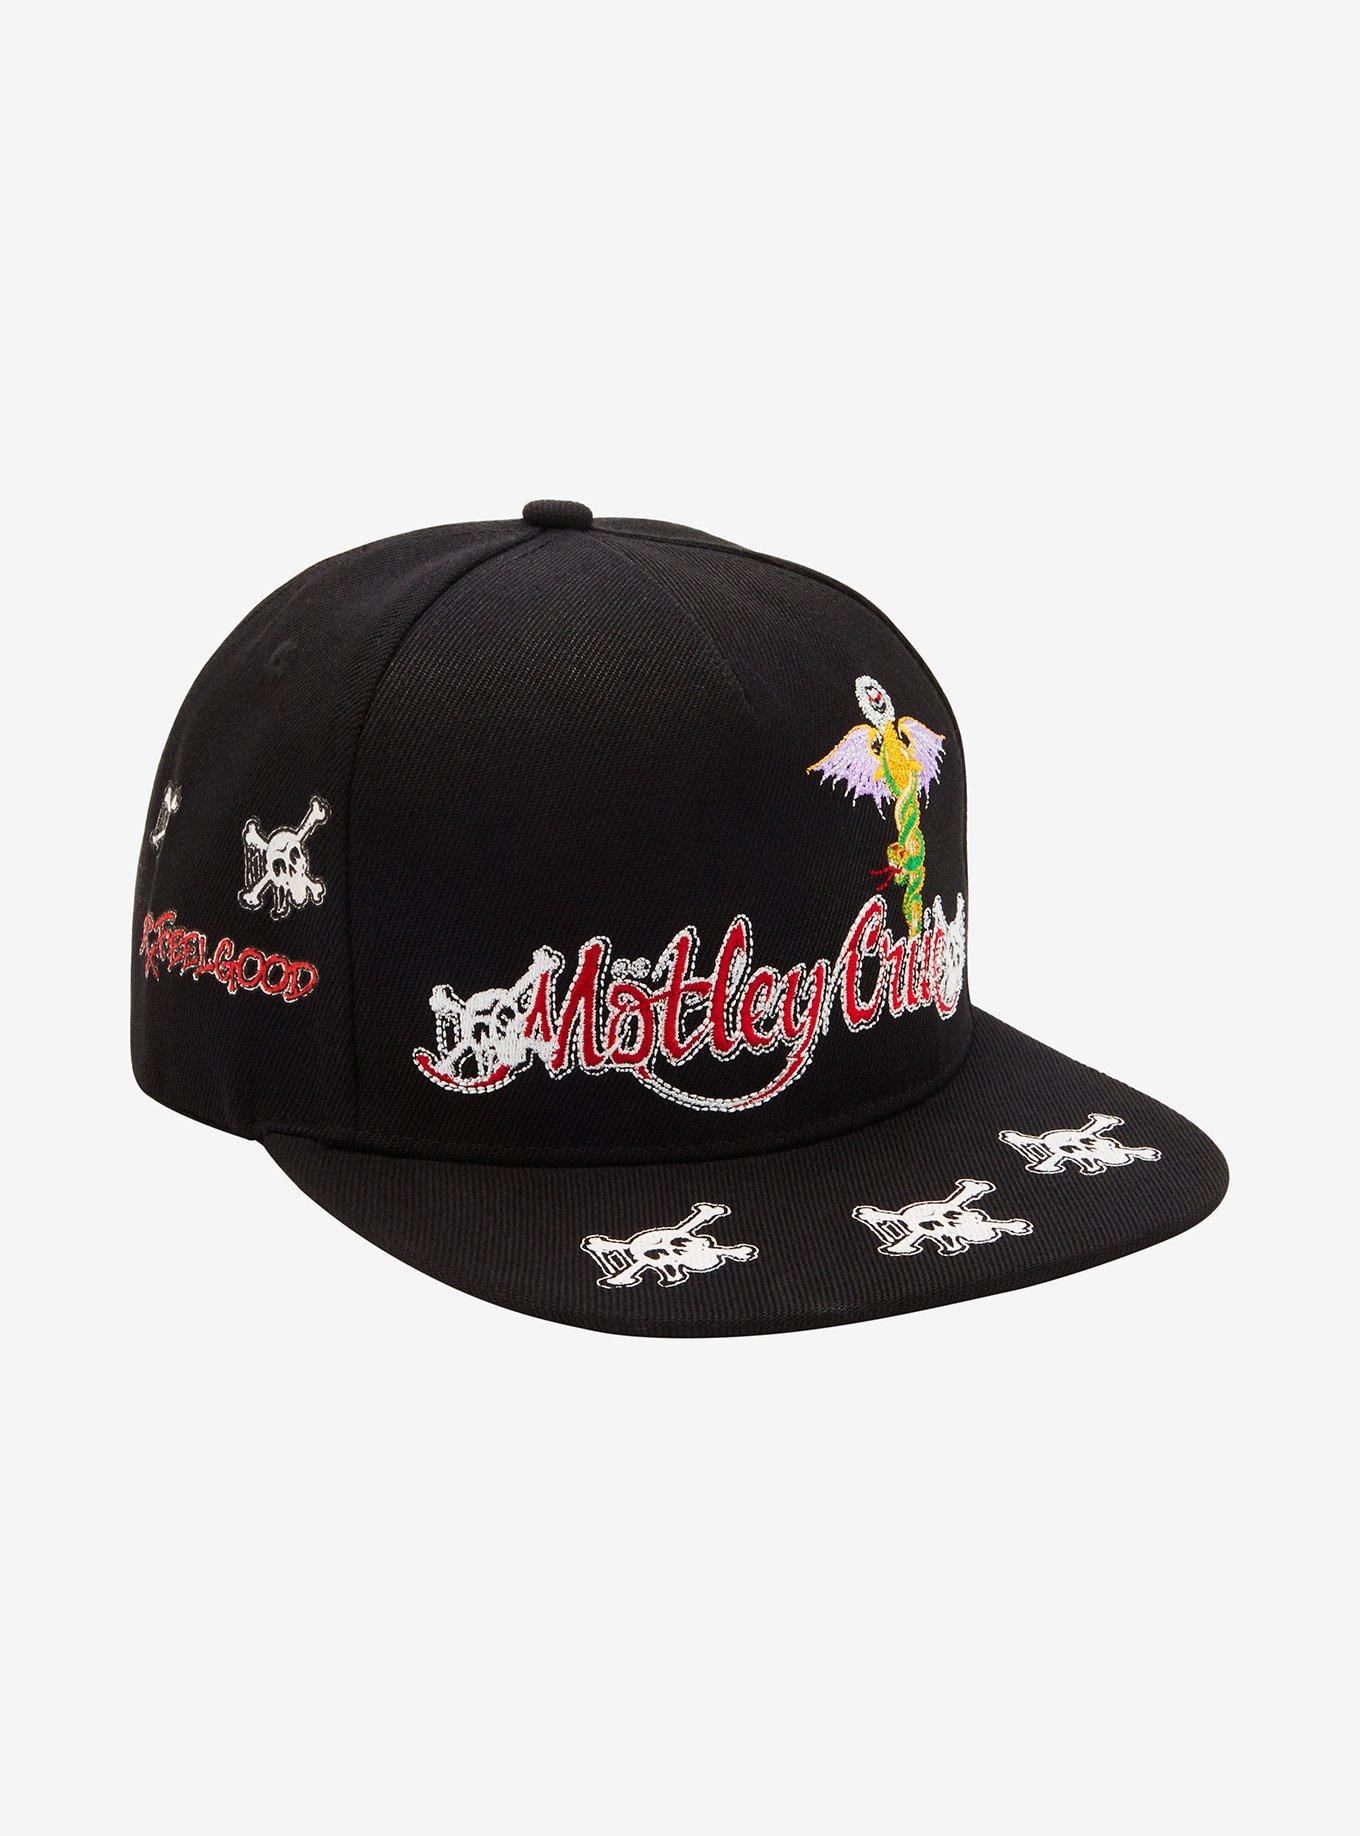 Happy Gilmore Hat - Logo PRINTED on front, GILMORE printed on back Gold  Snapback